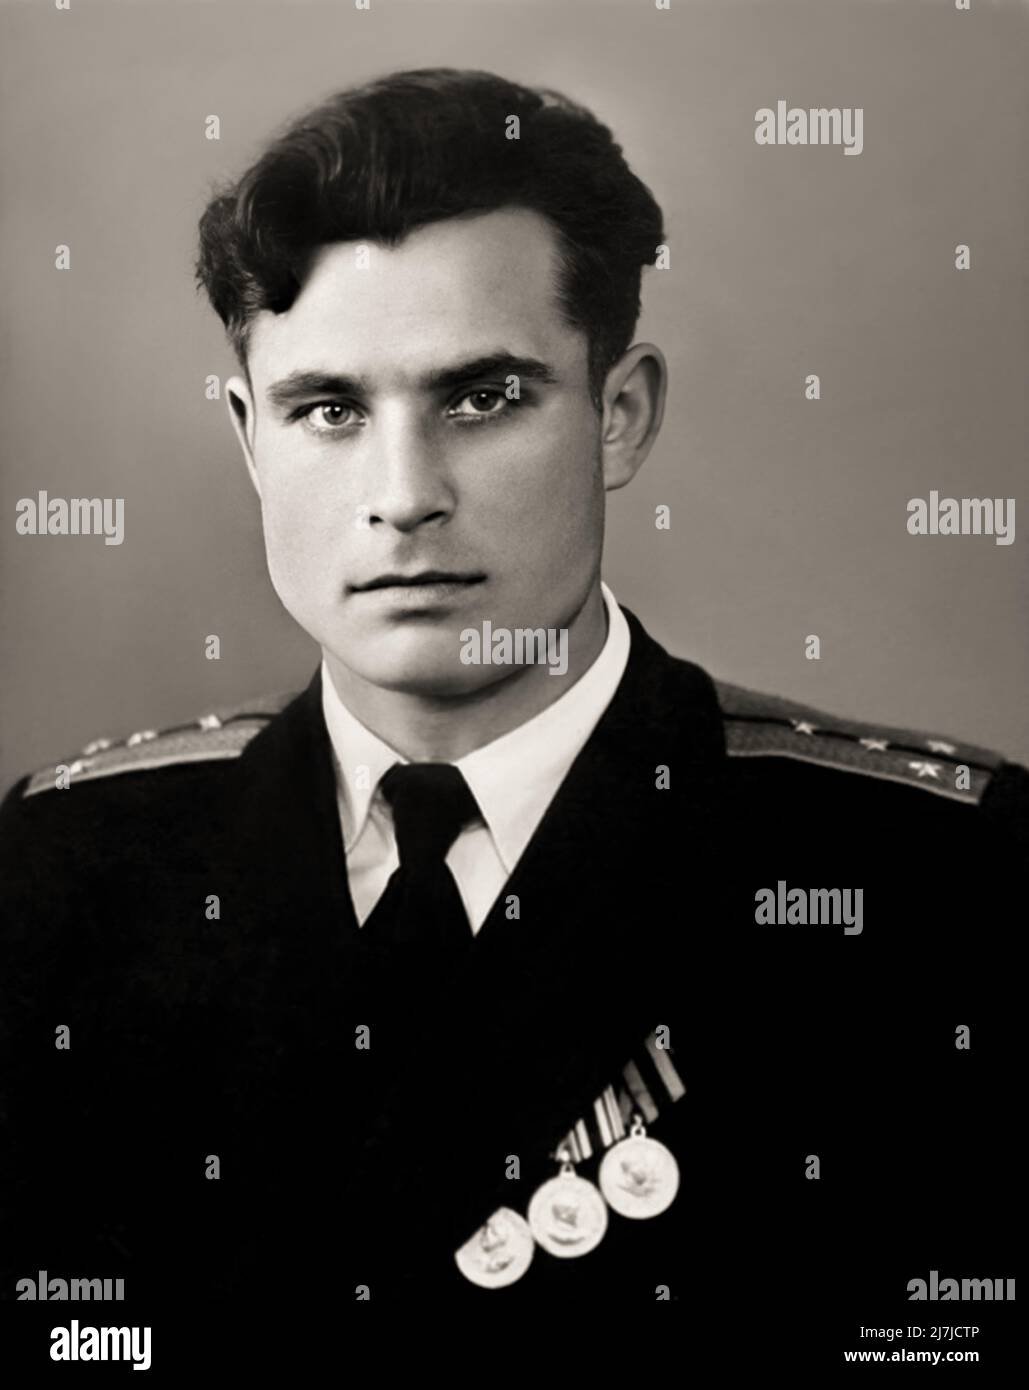 1955 , 17 february , RUSSIA : The communist military Soviet Navy officer hero VASILI ARKHIPOV ( Vasily Vasilij Aleksandrovič , 1926 - 1998 ). Was a Soviet Navy officer credited with preventing a Soviet nuclear launch ( and, potentially, all-out nuclear war ) during the Cuban Missile Crisis . Such an attack likely would have caused a major global thermonuclear response . As flotilla chief of staff and second-in-command of the diesel powered submarine B-59, Arkhipov refused to authorize the captain's use of nuclear torpedoes against the United States Navy, a decision requiring the agreement of a Stock Photo